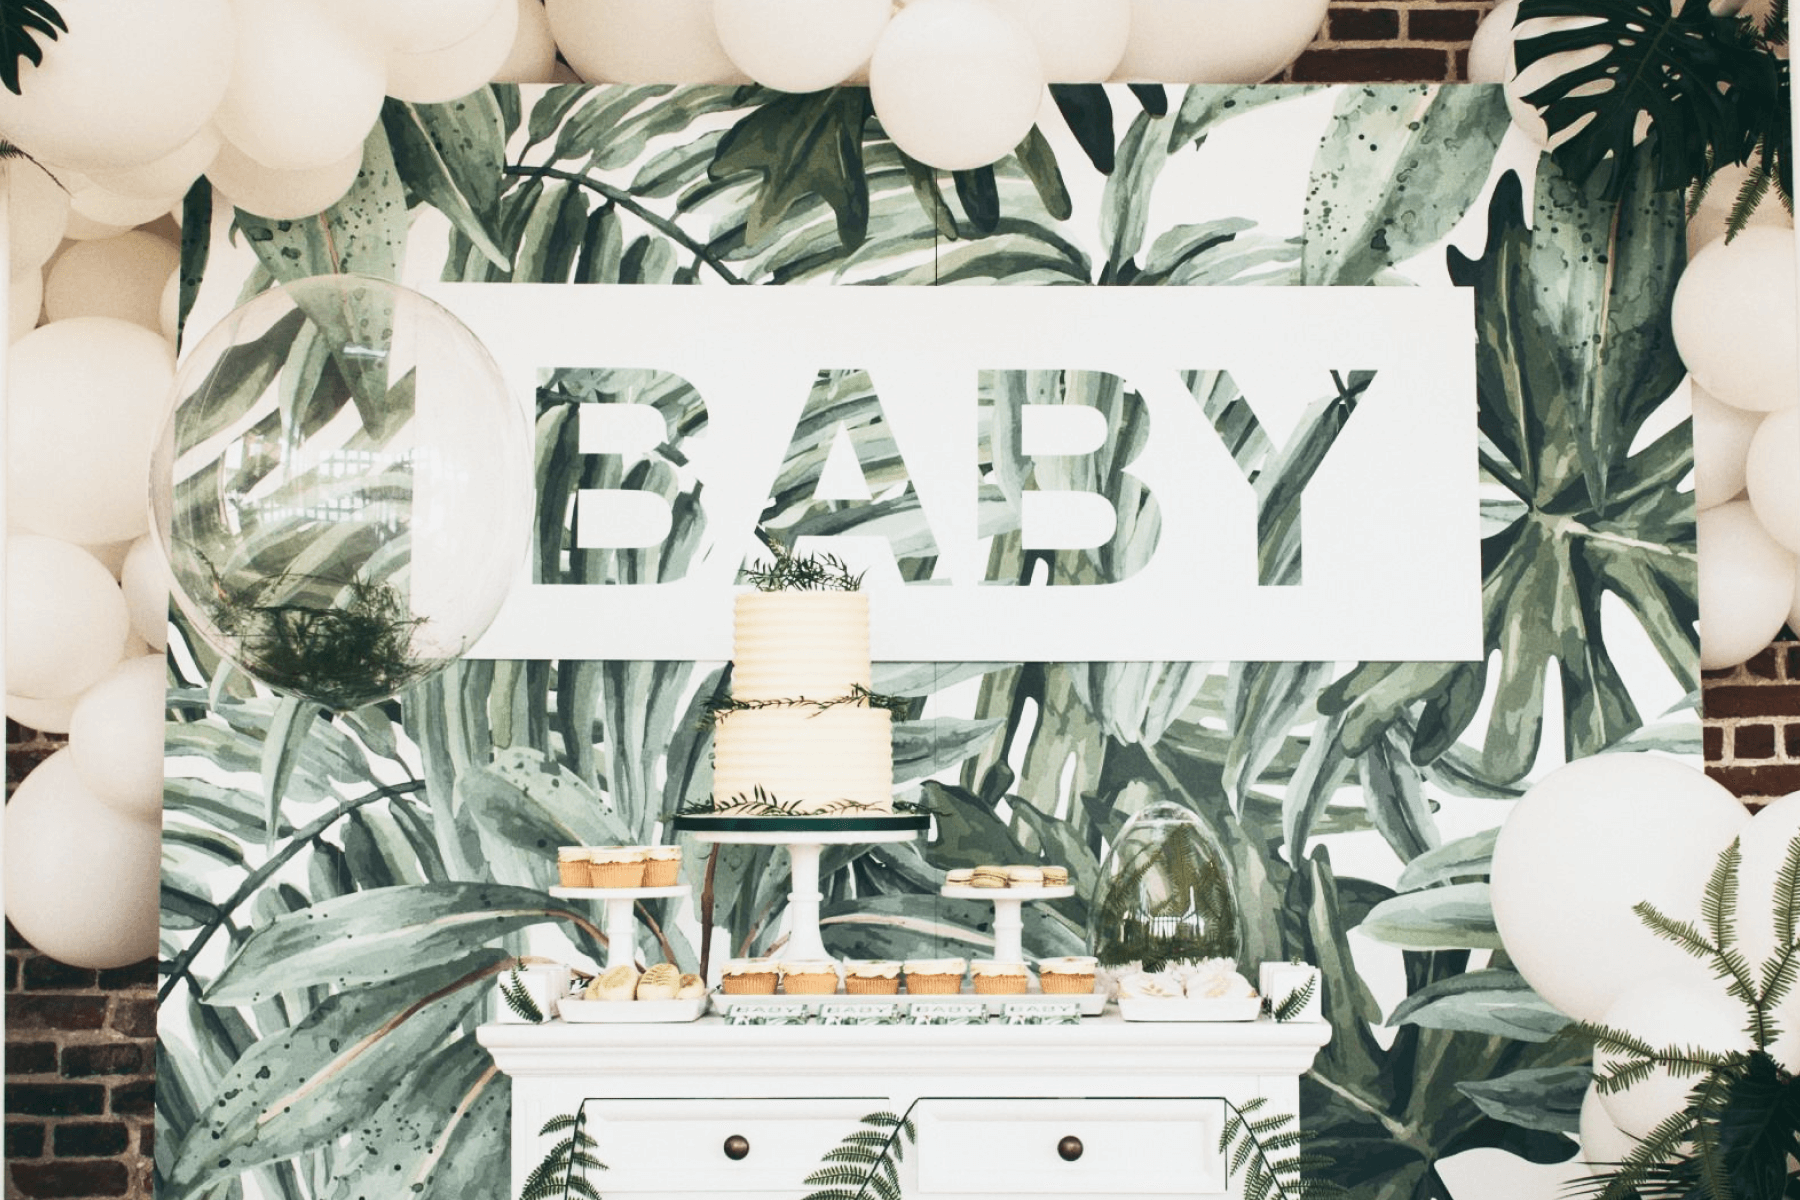 A baby shower dessert display with a two-tiered cake and a backdrop printed with tropical plant fronds and the word “BABY” spelled out in the center.